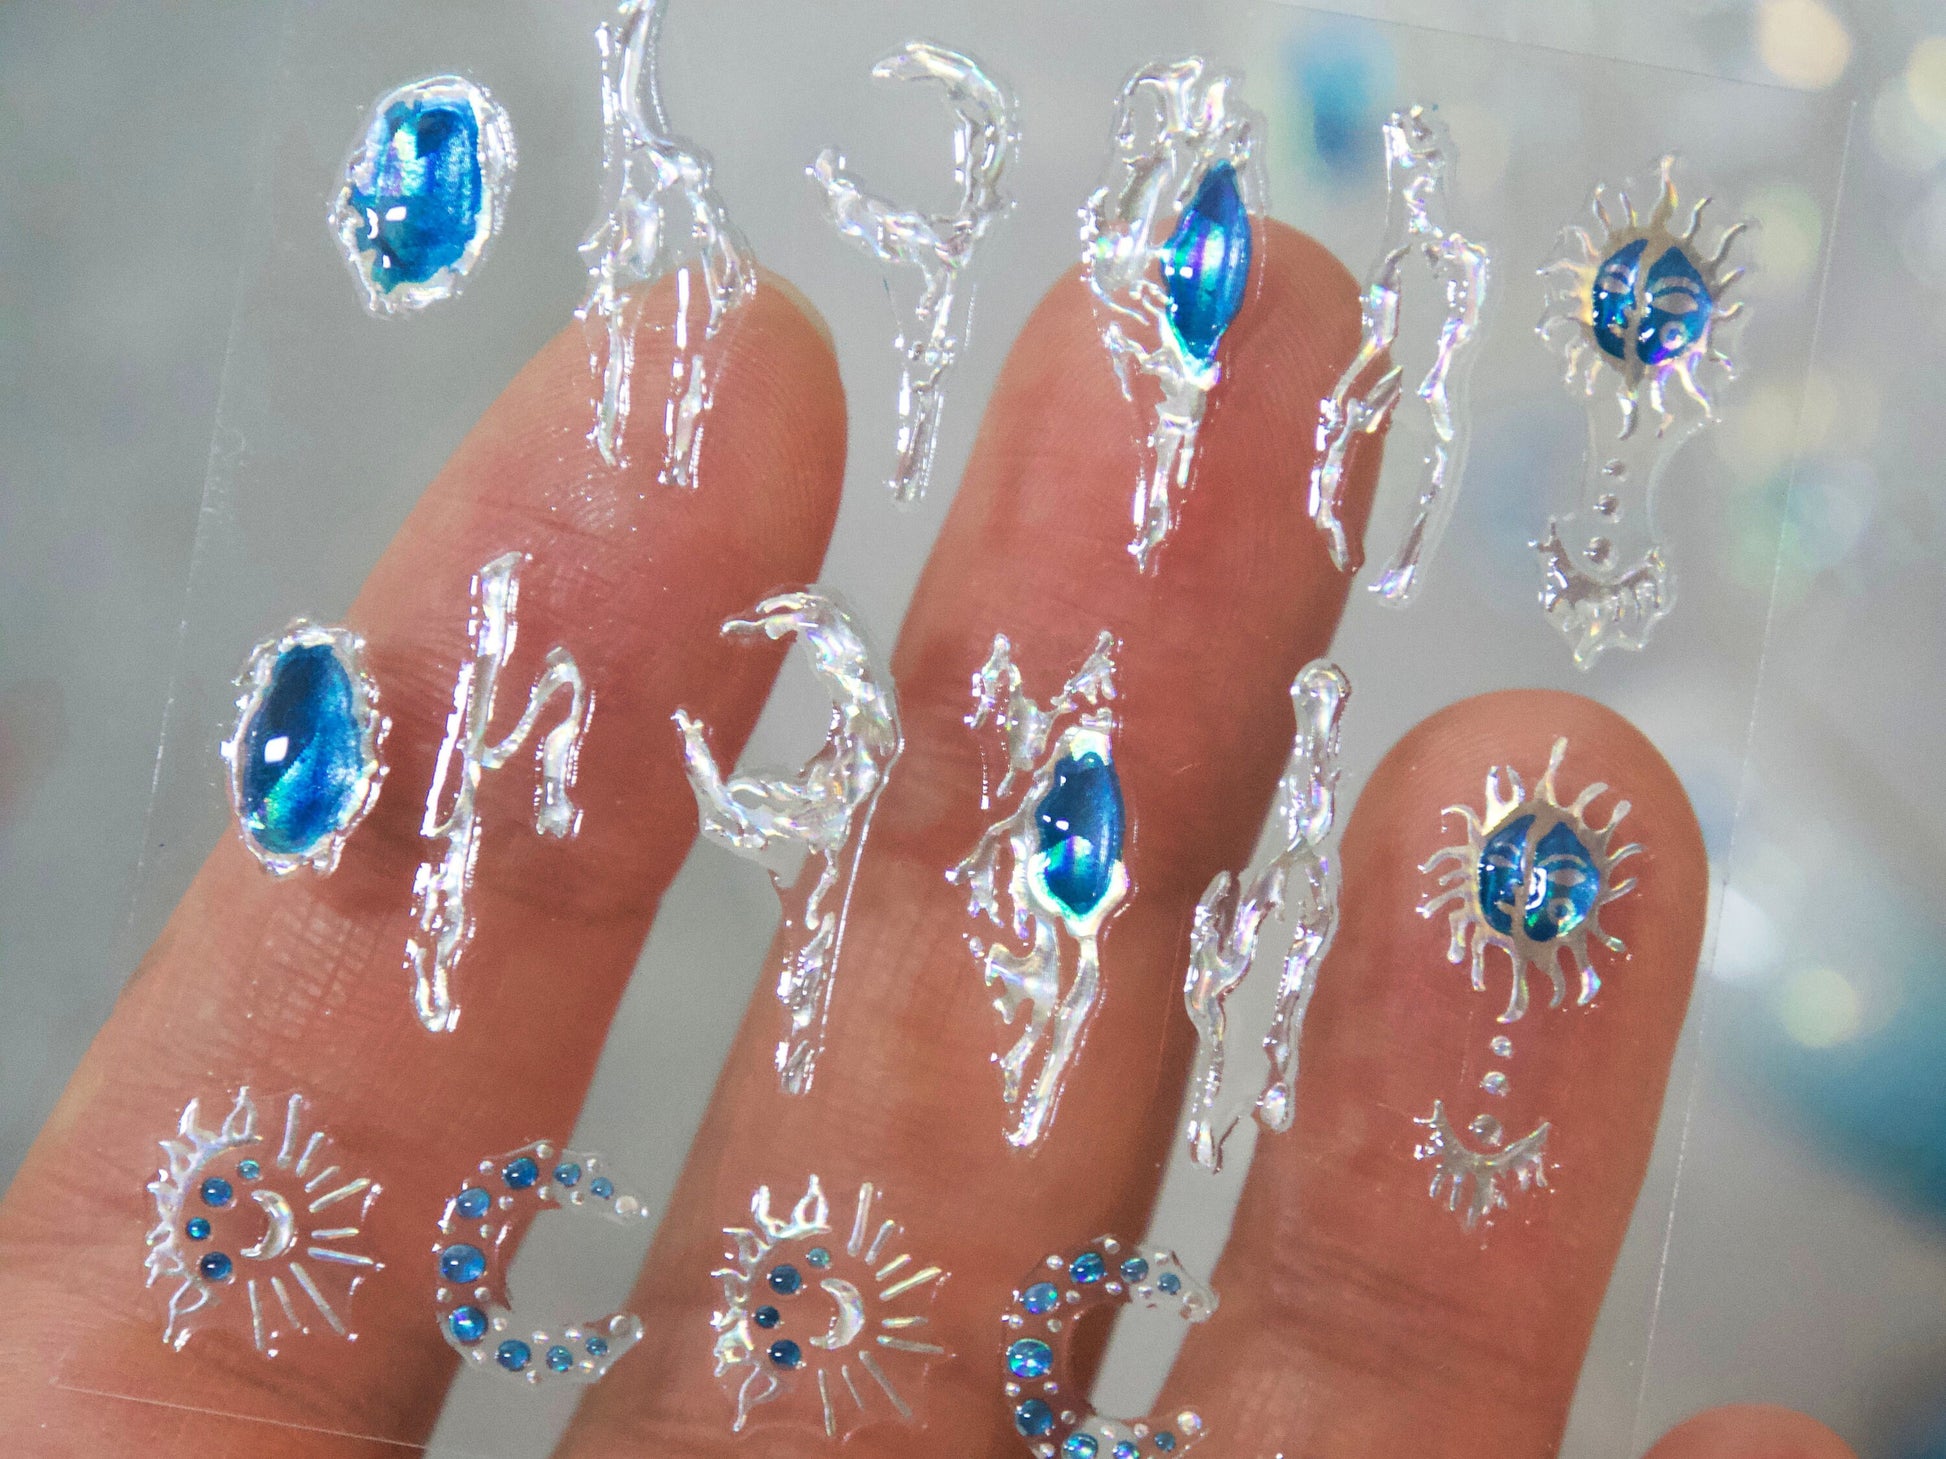 Blue Gems Jelly Nails Sticker/ 3D Halo imitation hand-painted Peel off Stickers/ Blue Ocean Gems Moon Abstract Artistic Lines Manicure